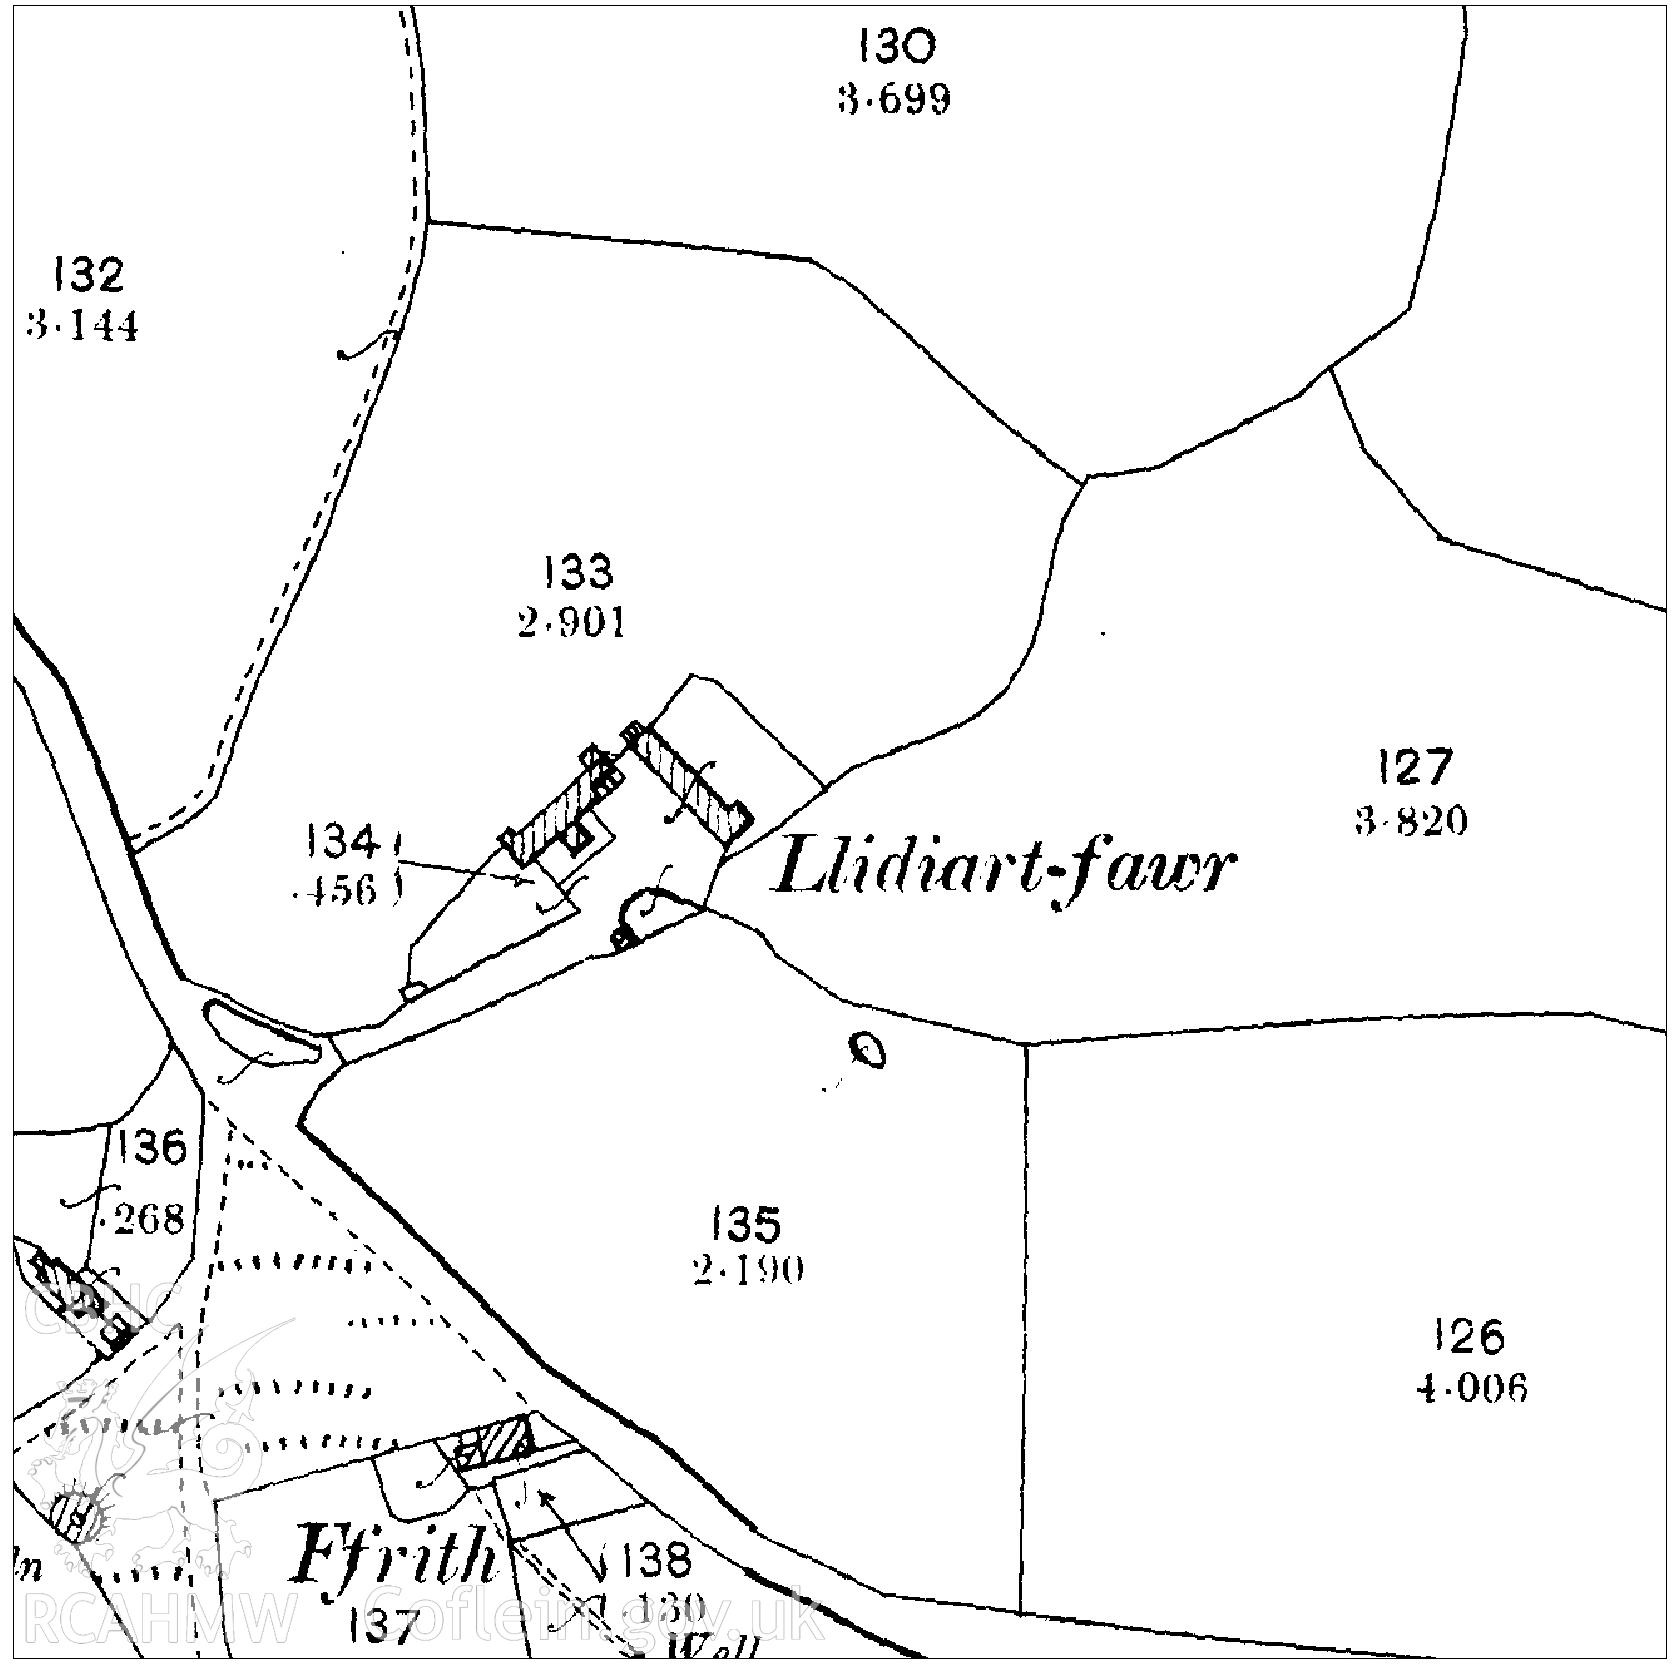 1899 map of area around Llidiart Fawr, Denbighshire. Used as report illustration for CPAT Project 2350: Llidiart Fawr, Pentrecelyn, Ruthin - Archaeological Building Survey, 2018. Report no. 1644.